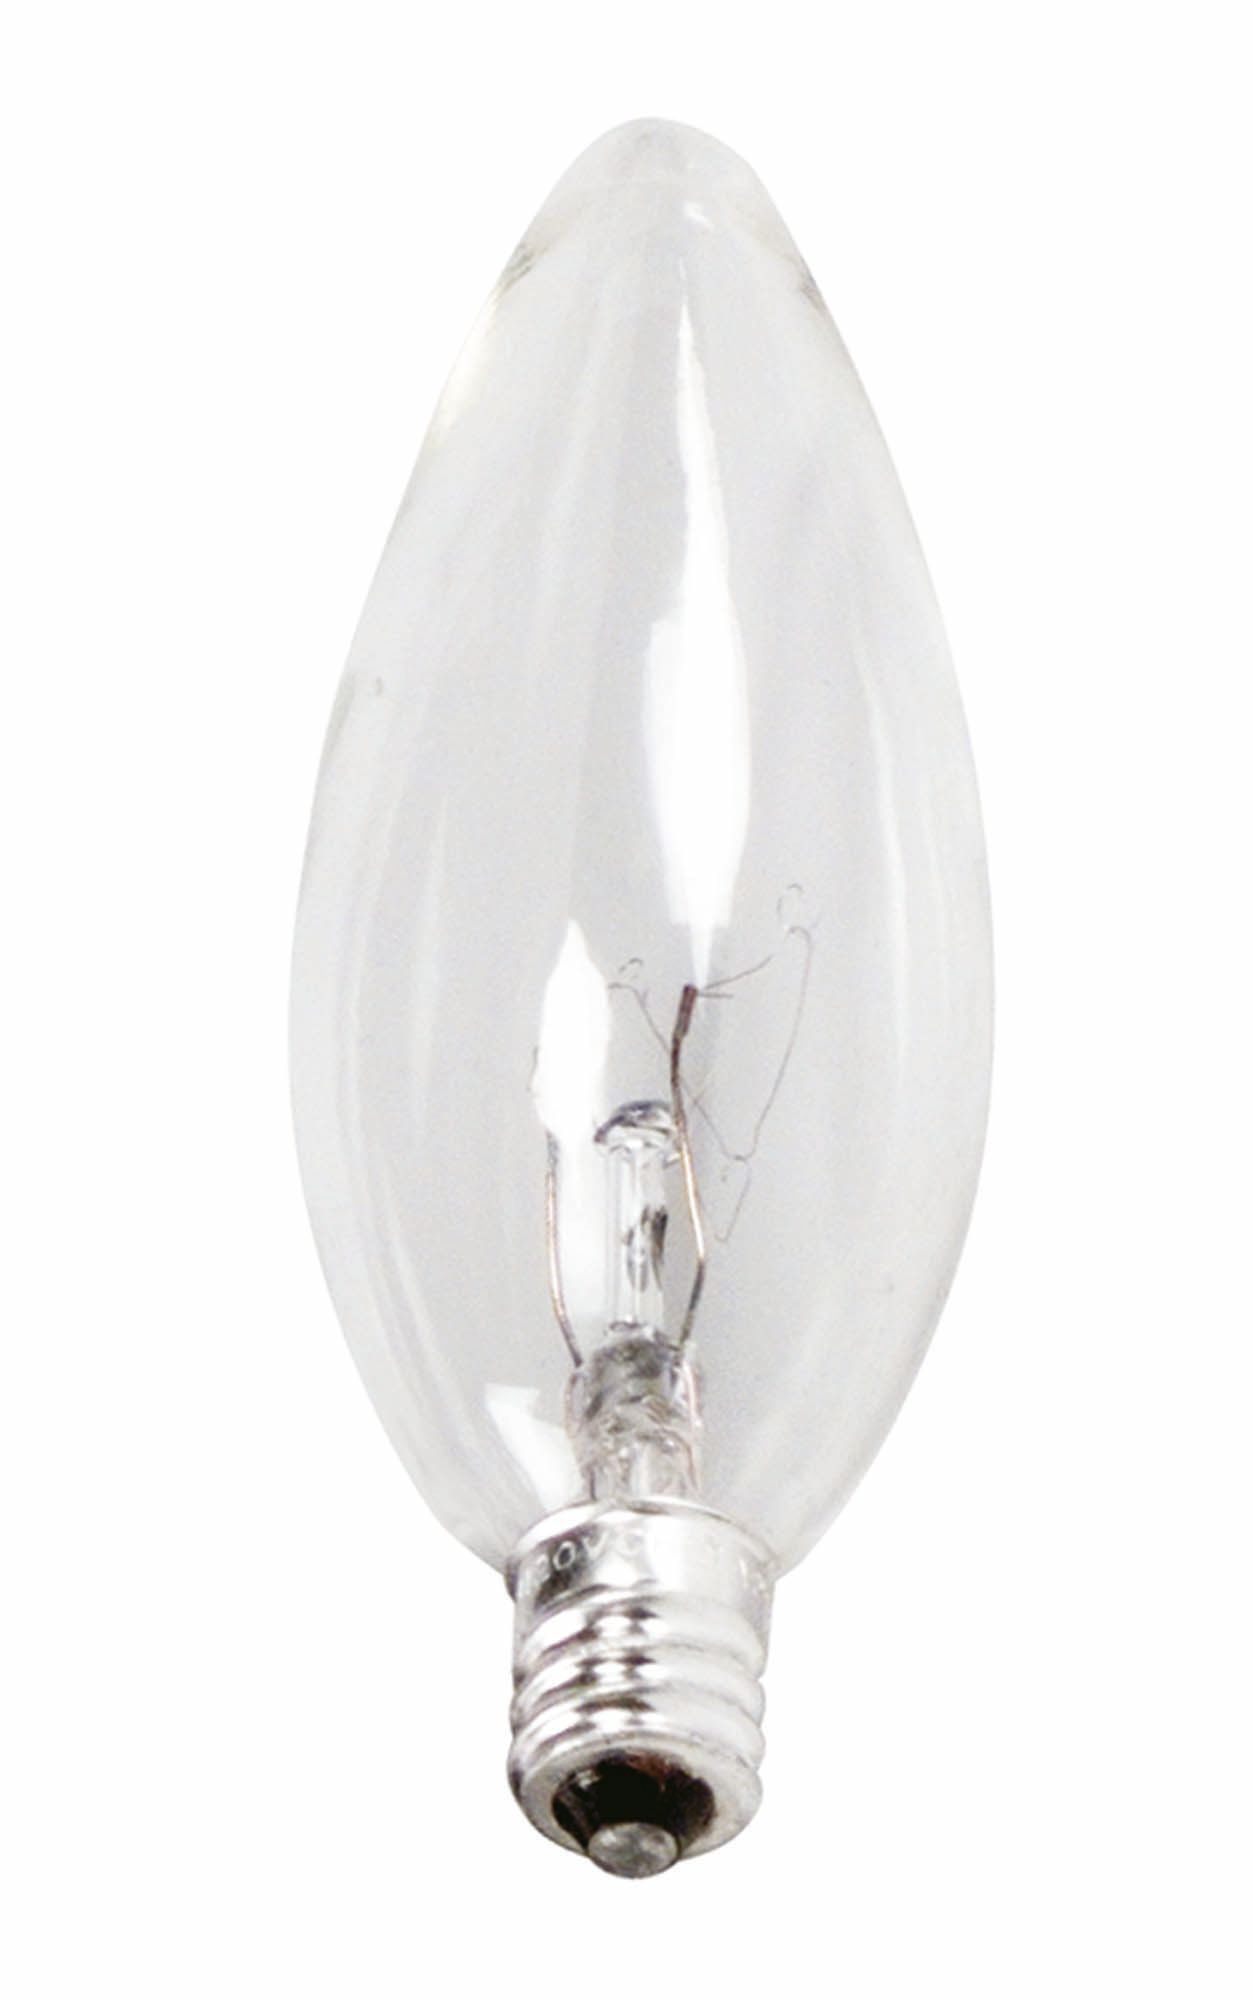 168245 (BC25B10 1/2 C/CL/LL 6/2) Incandescent Lamp Philips Lighting;Signify Lamps